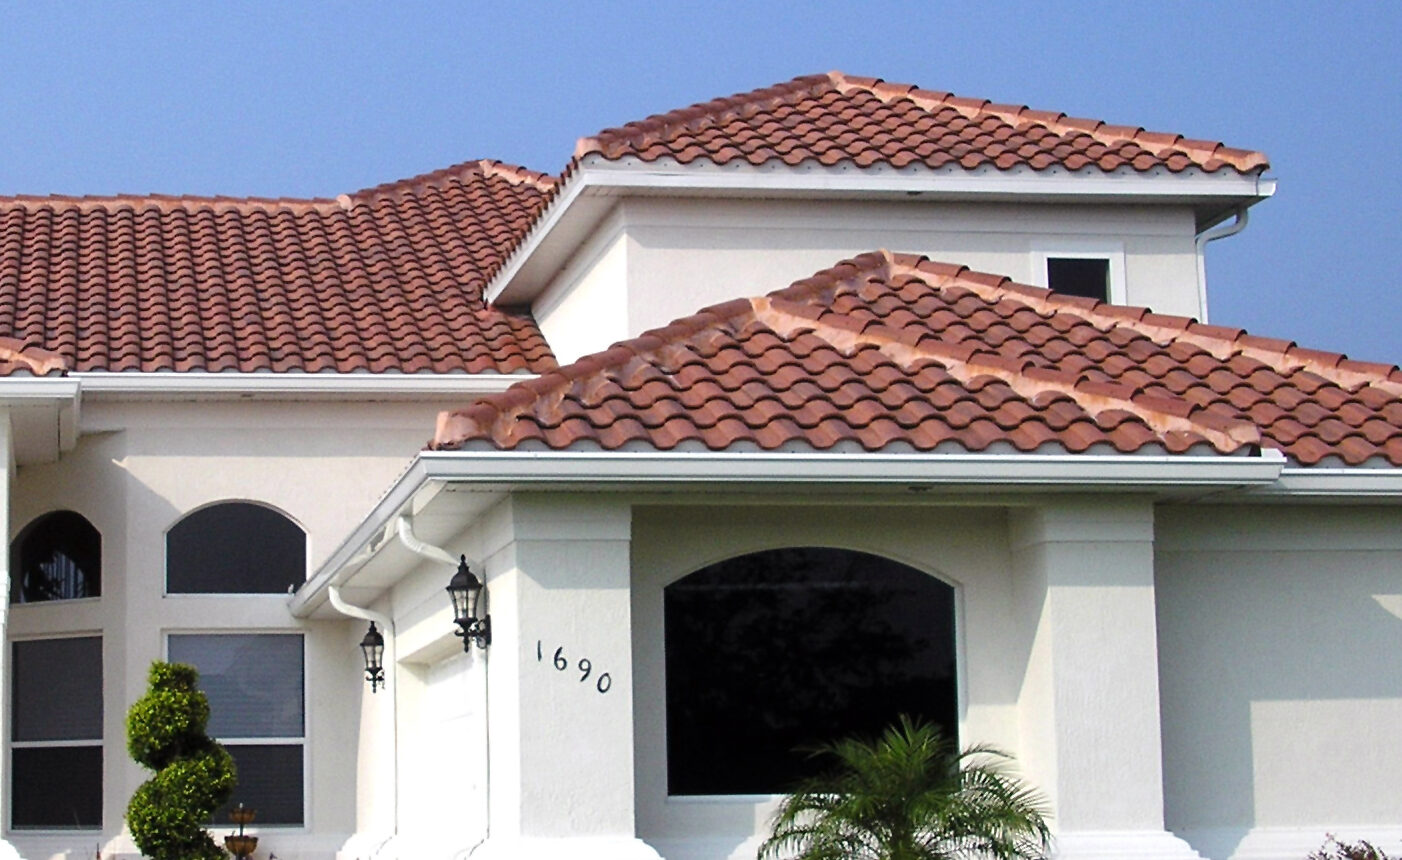 Tile-roof-on-a-white-house-close-up